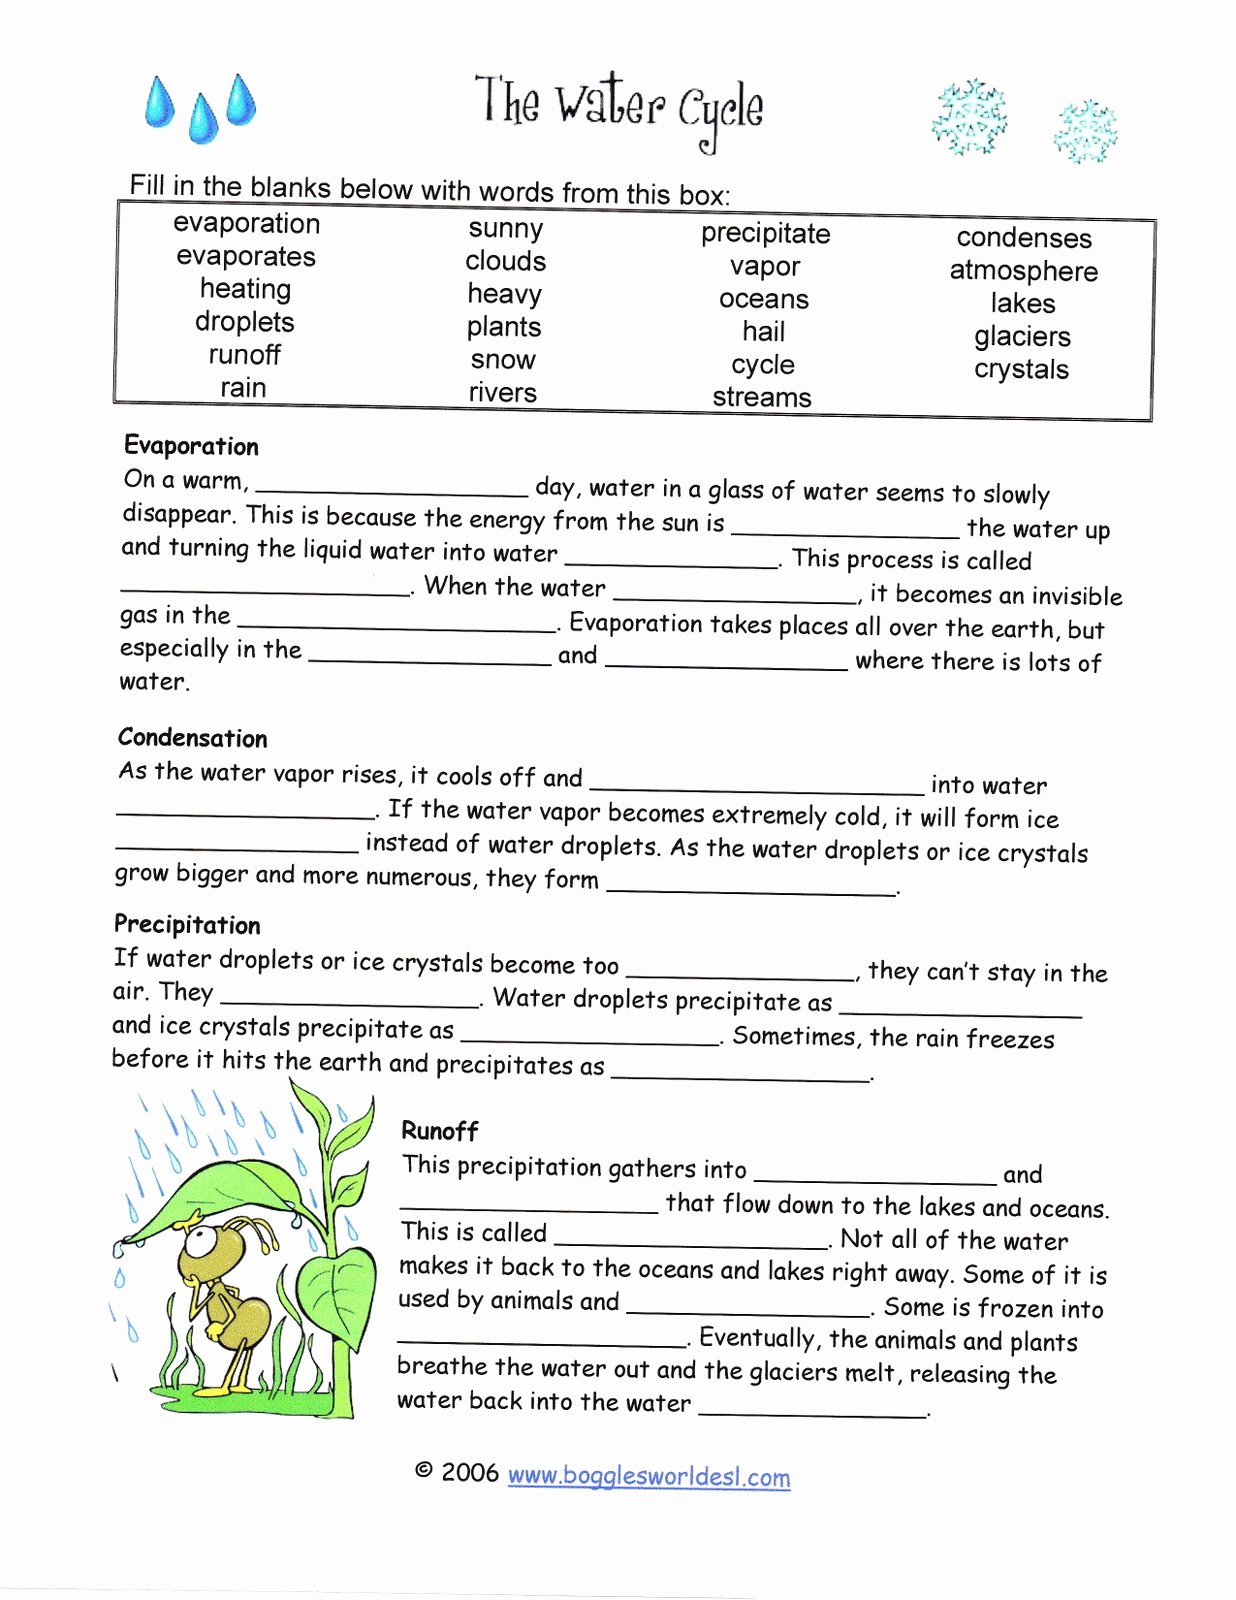 The Water Cycle Worksheet Answers Awesome Dr Gayden S Sixth Grade Science Class October 2010